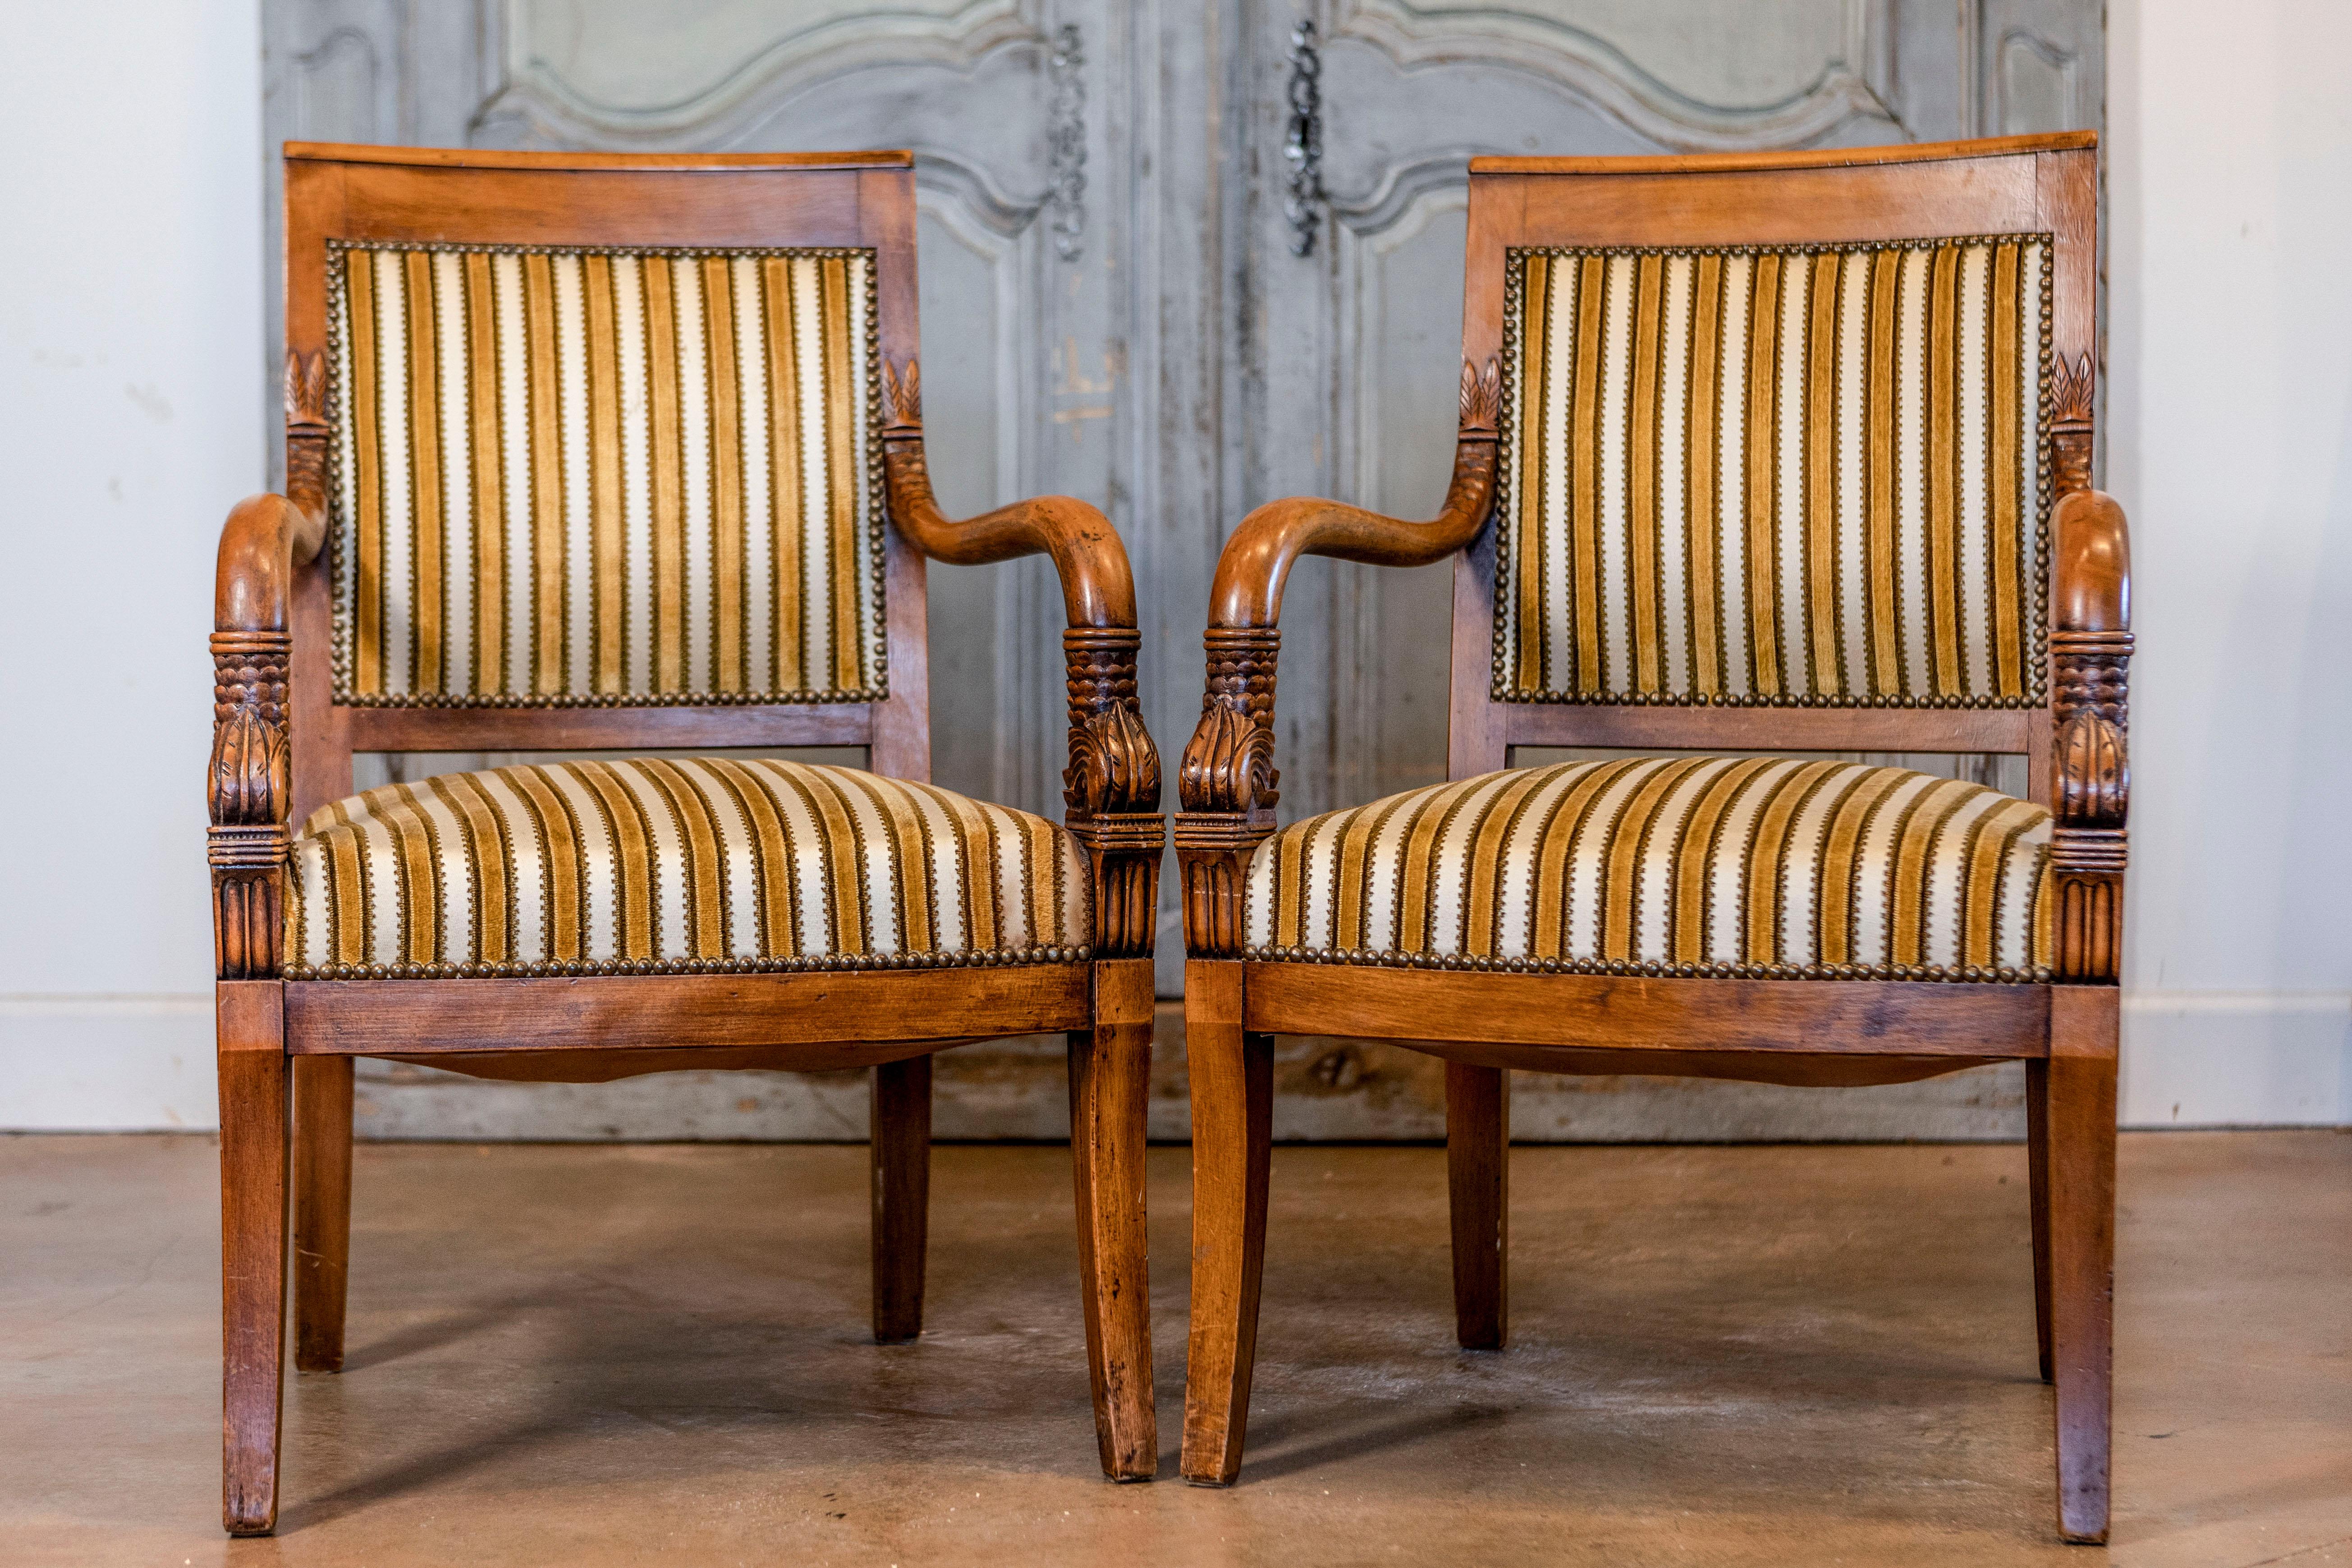 A pair of French Empire style light walnut armchairs with foliage carved curving arms and saber legs. Step back in time with these exquisite French Empire style armchairs, beautifully crafted in the 20th century. Featuring the iconic foliage-carved